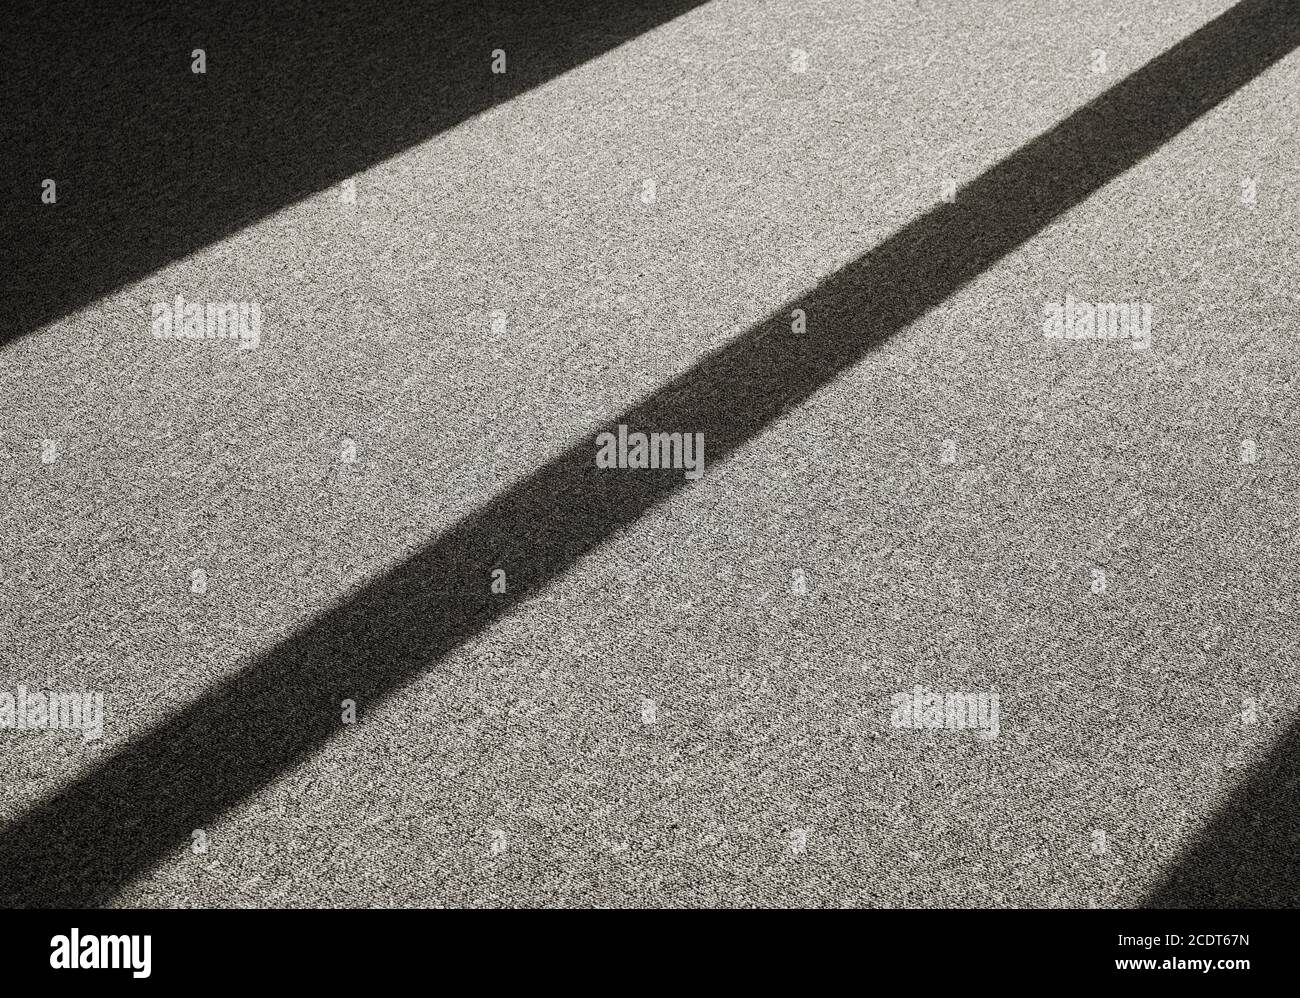 Shadow by incident light on a carpet floor in front of a window Stock Photo